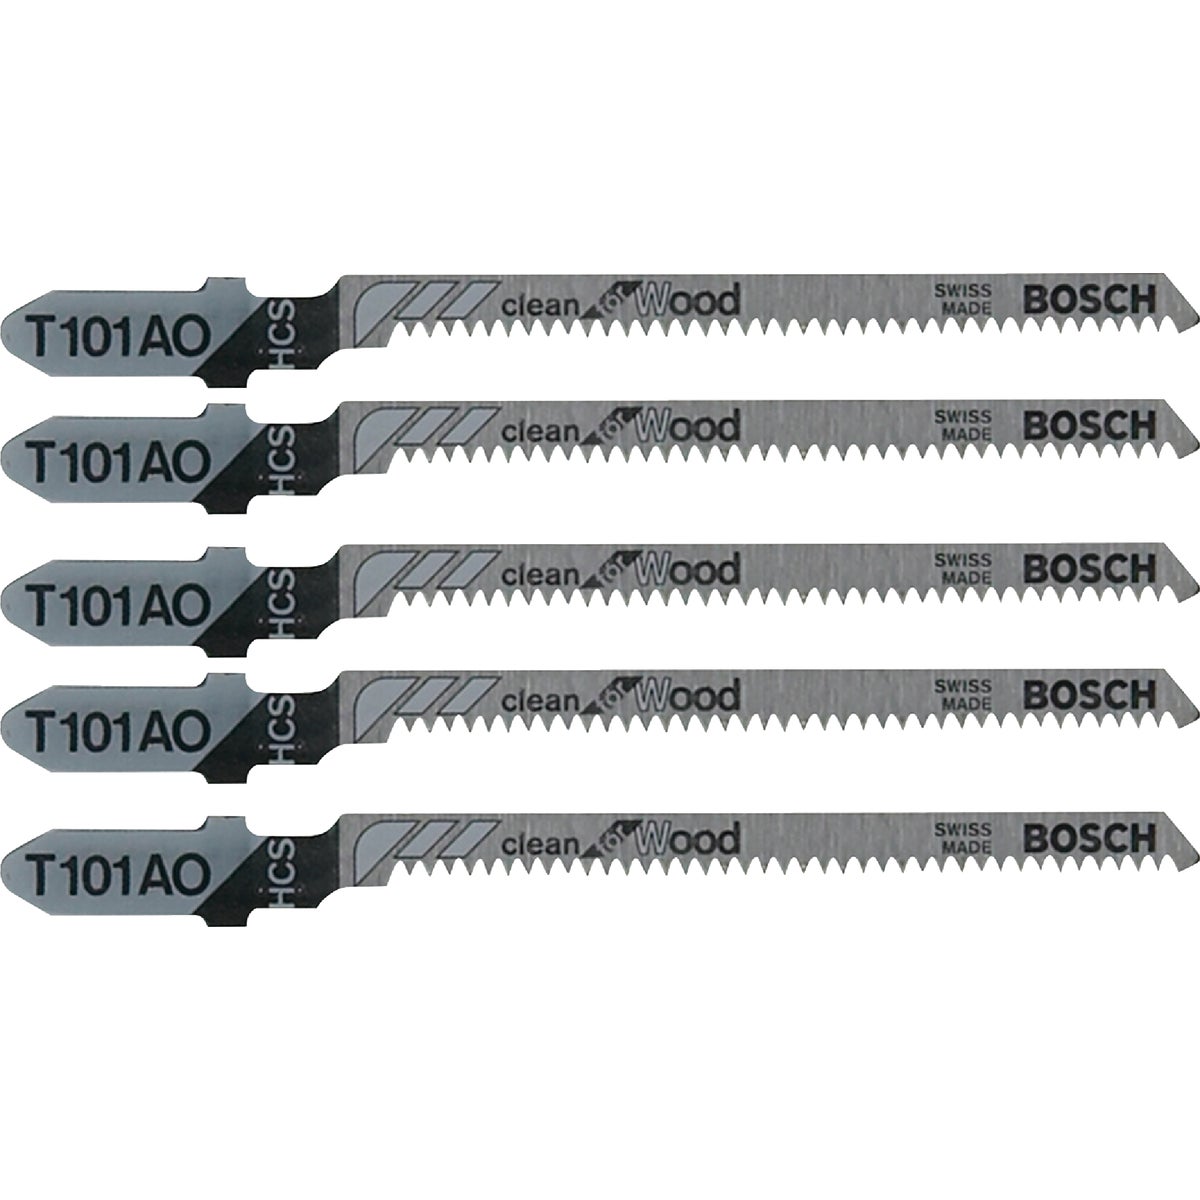 Bosch T-Shank 3 In. x 20 TPI High Carbon Steel Jig Saw Blade, Clean for Wood (5-Pack)